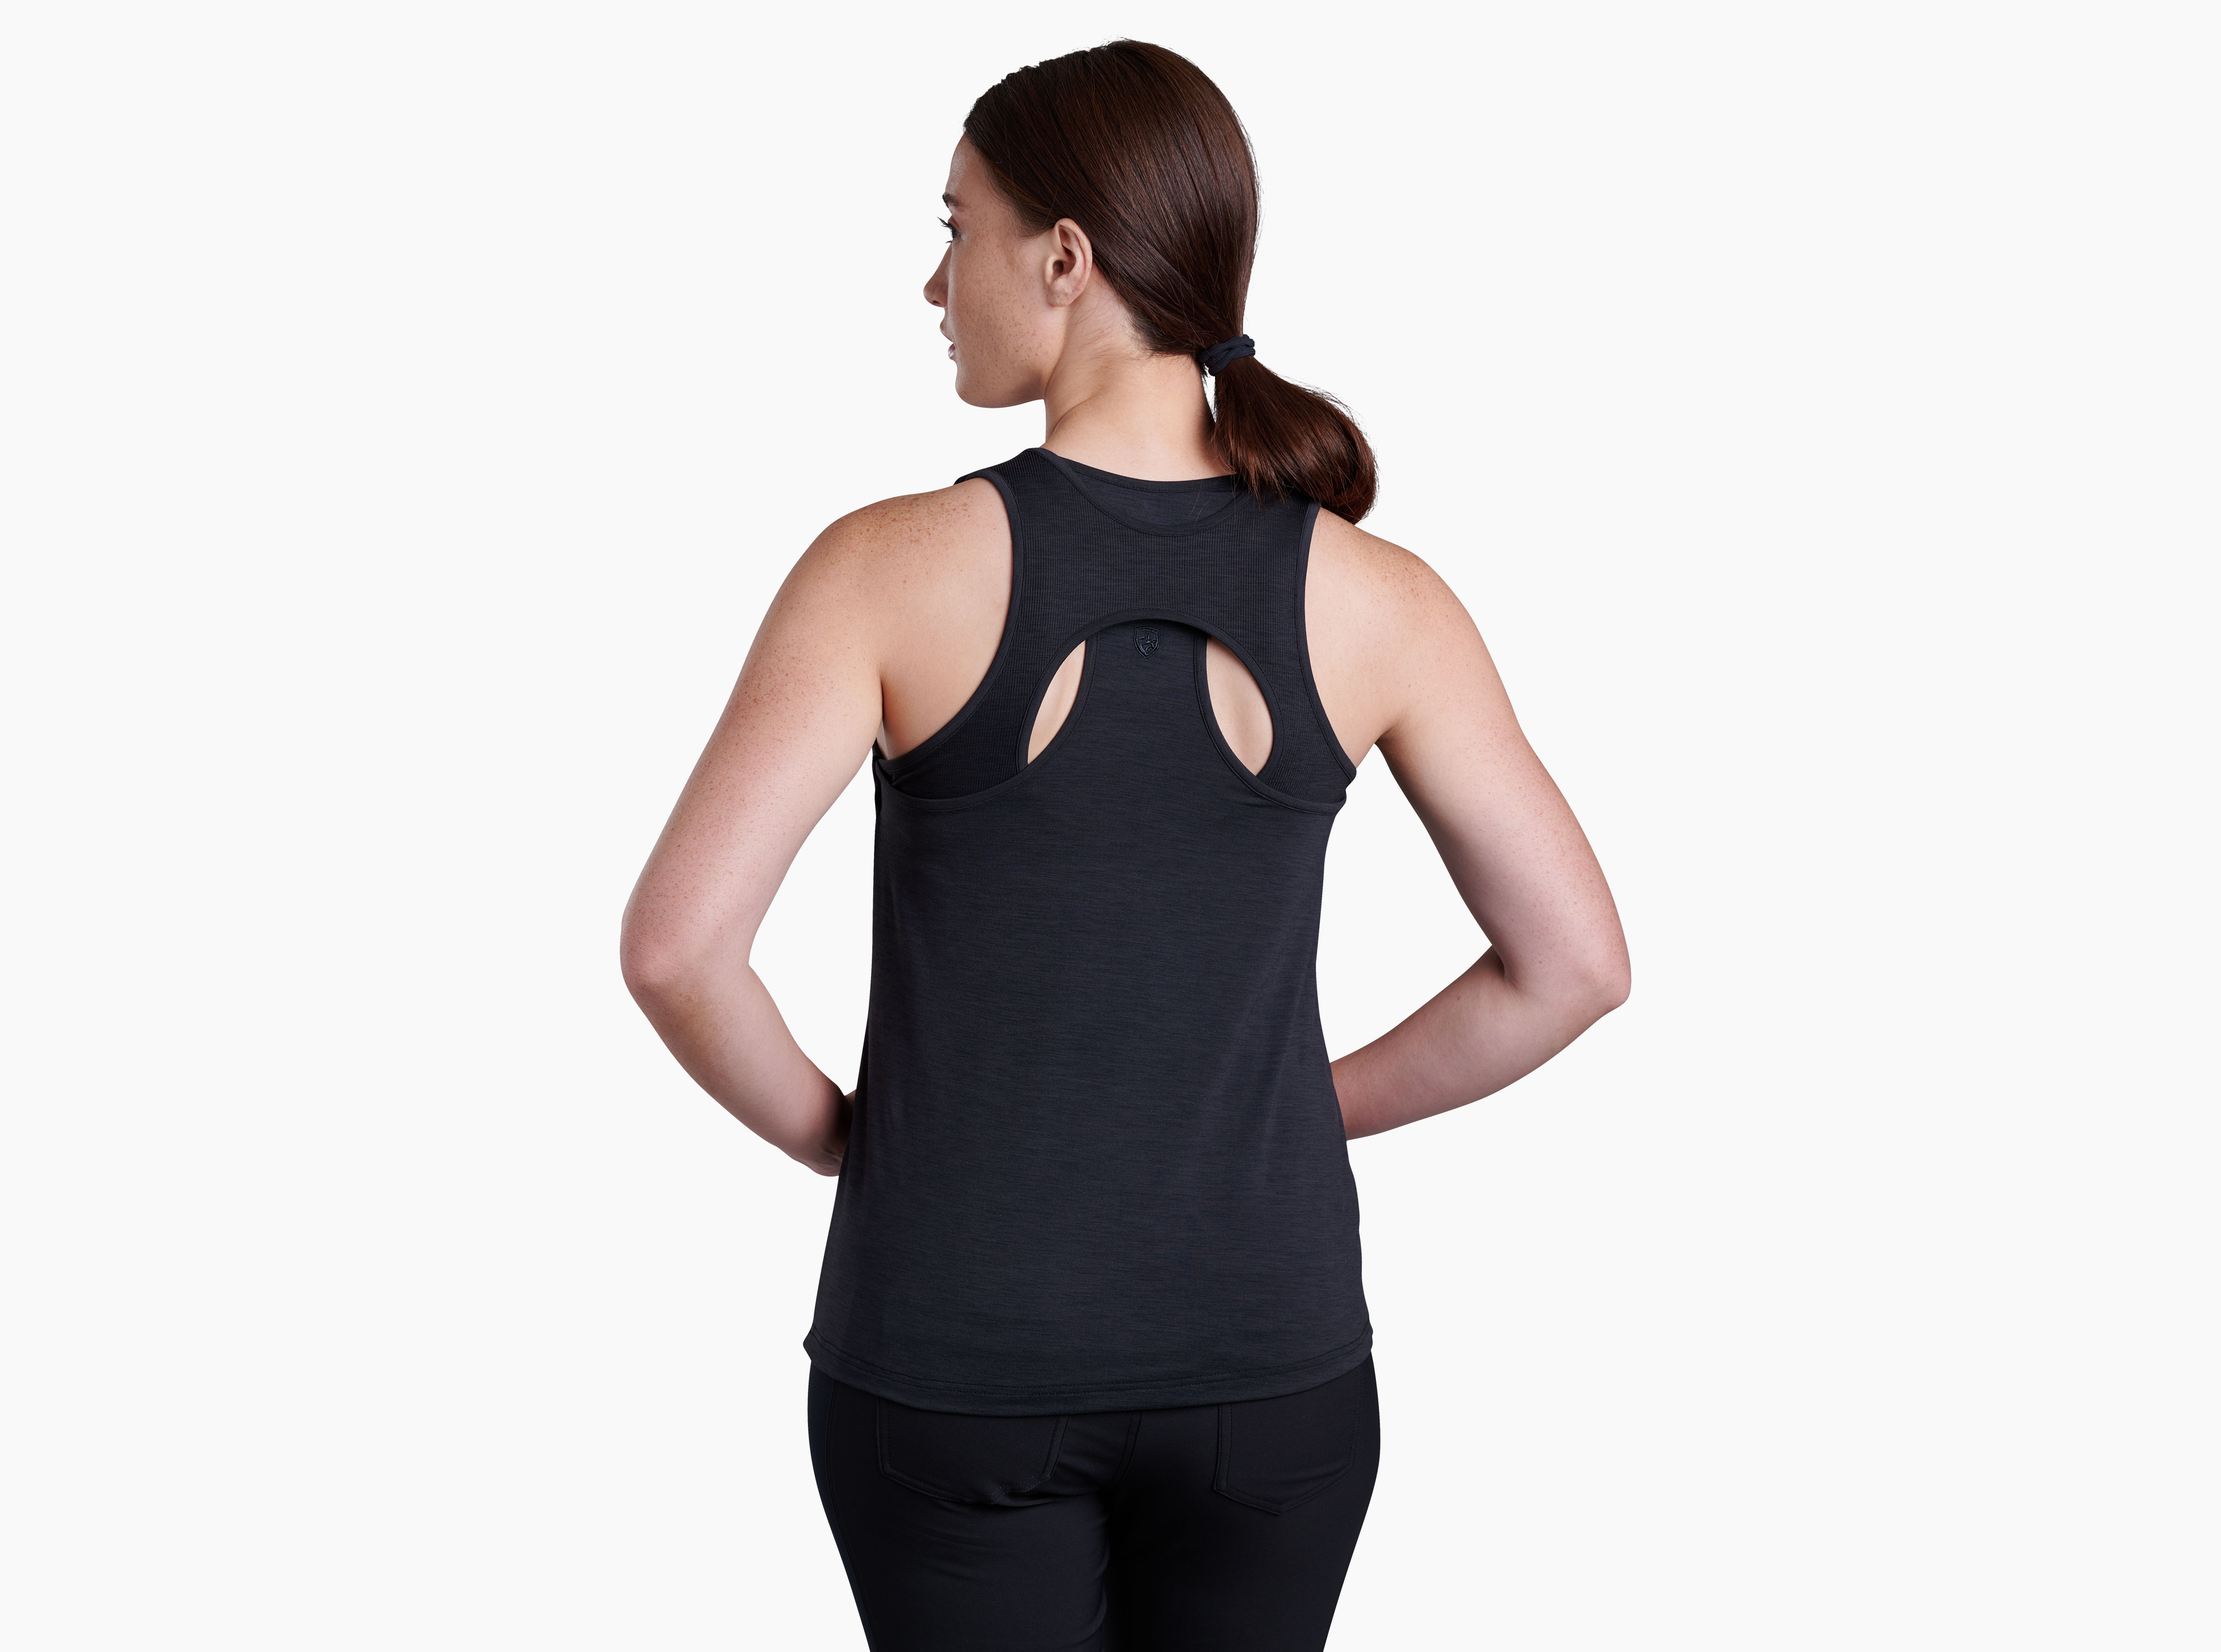 TRANQUILITY Tank Top – Inspira: The Lifestyle Brand